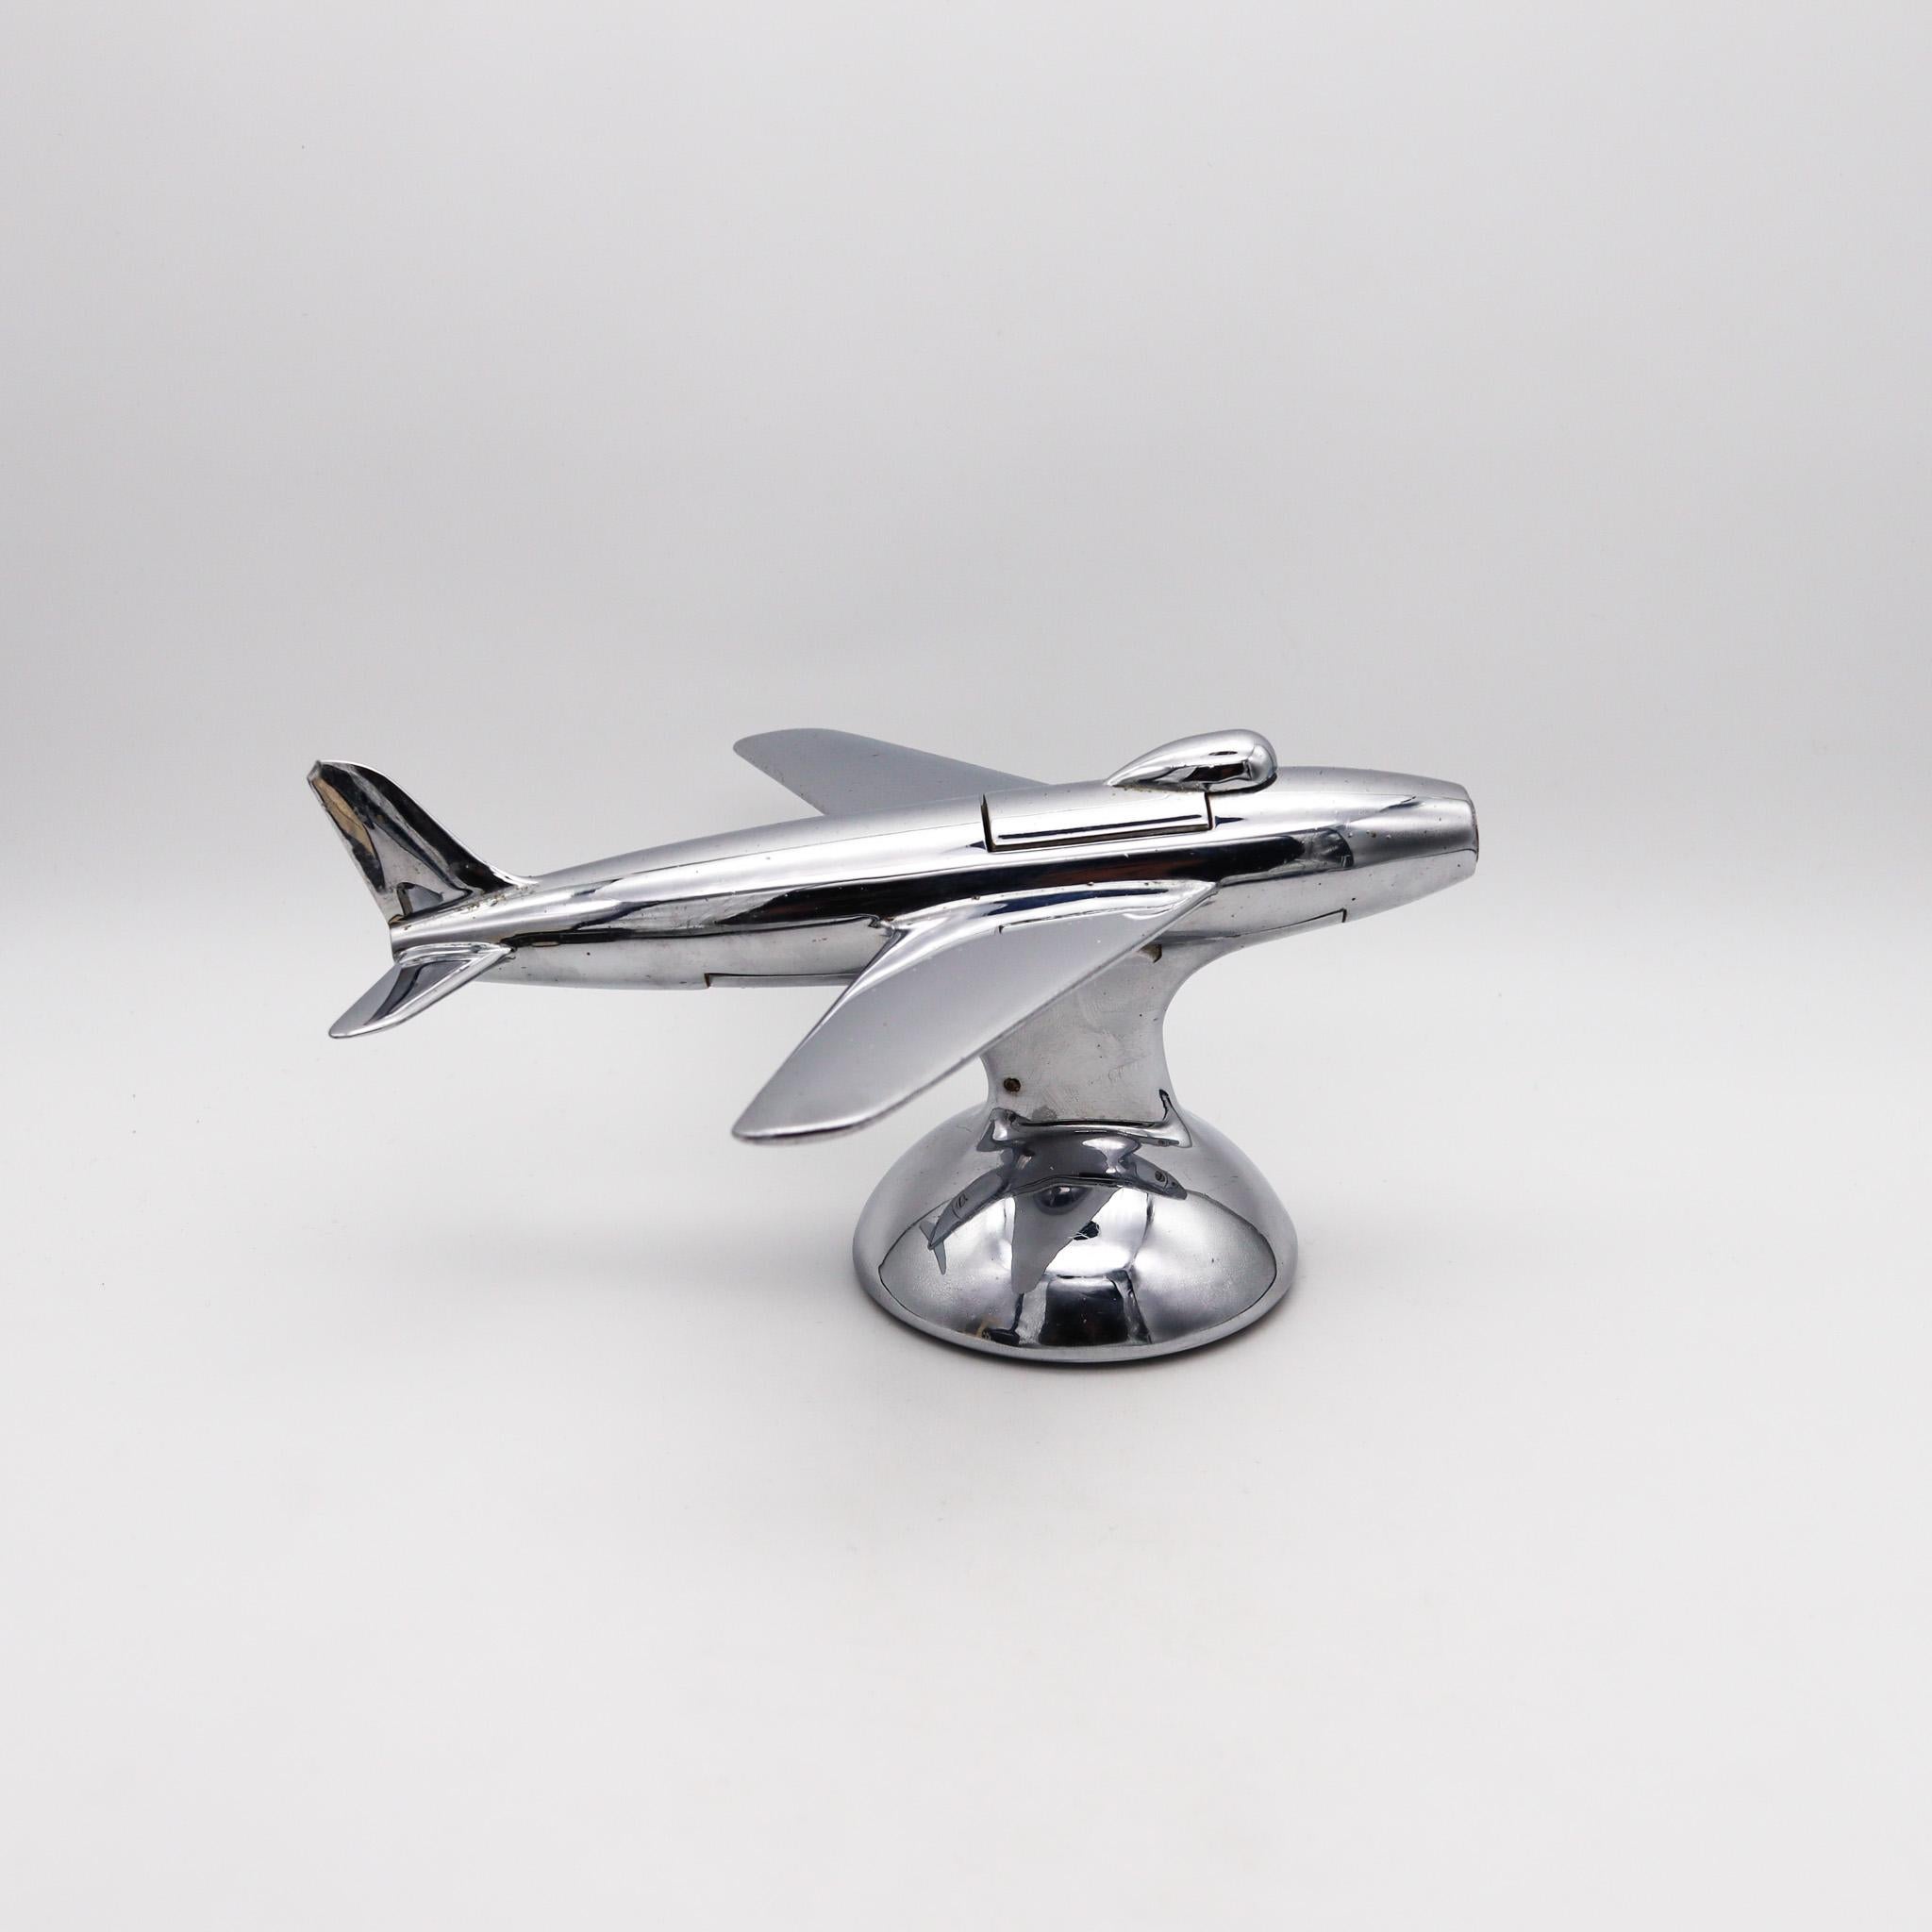 F-86 Jet fighter aircraft table lighter designed by Alfred Dunhill.

An unusual table desk lighter made in London England by the renowned Alfred Dunhill Company, between 1954 and 1961. The lighter was done in polished chromed steel, during the